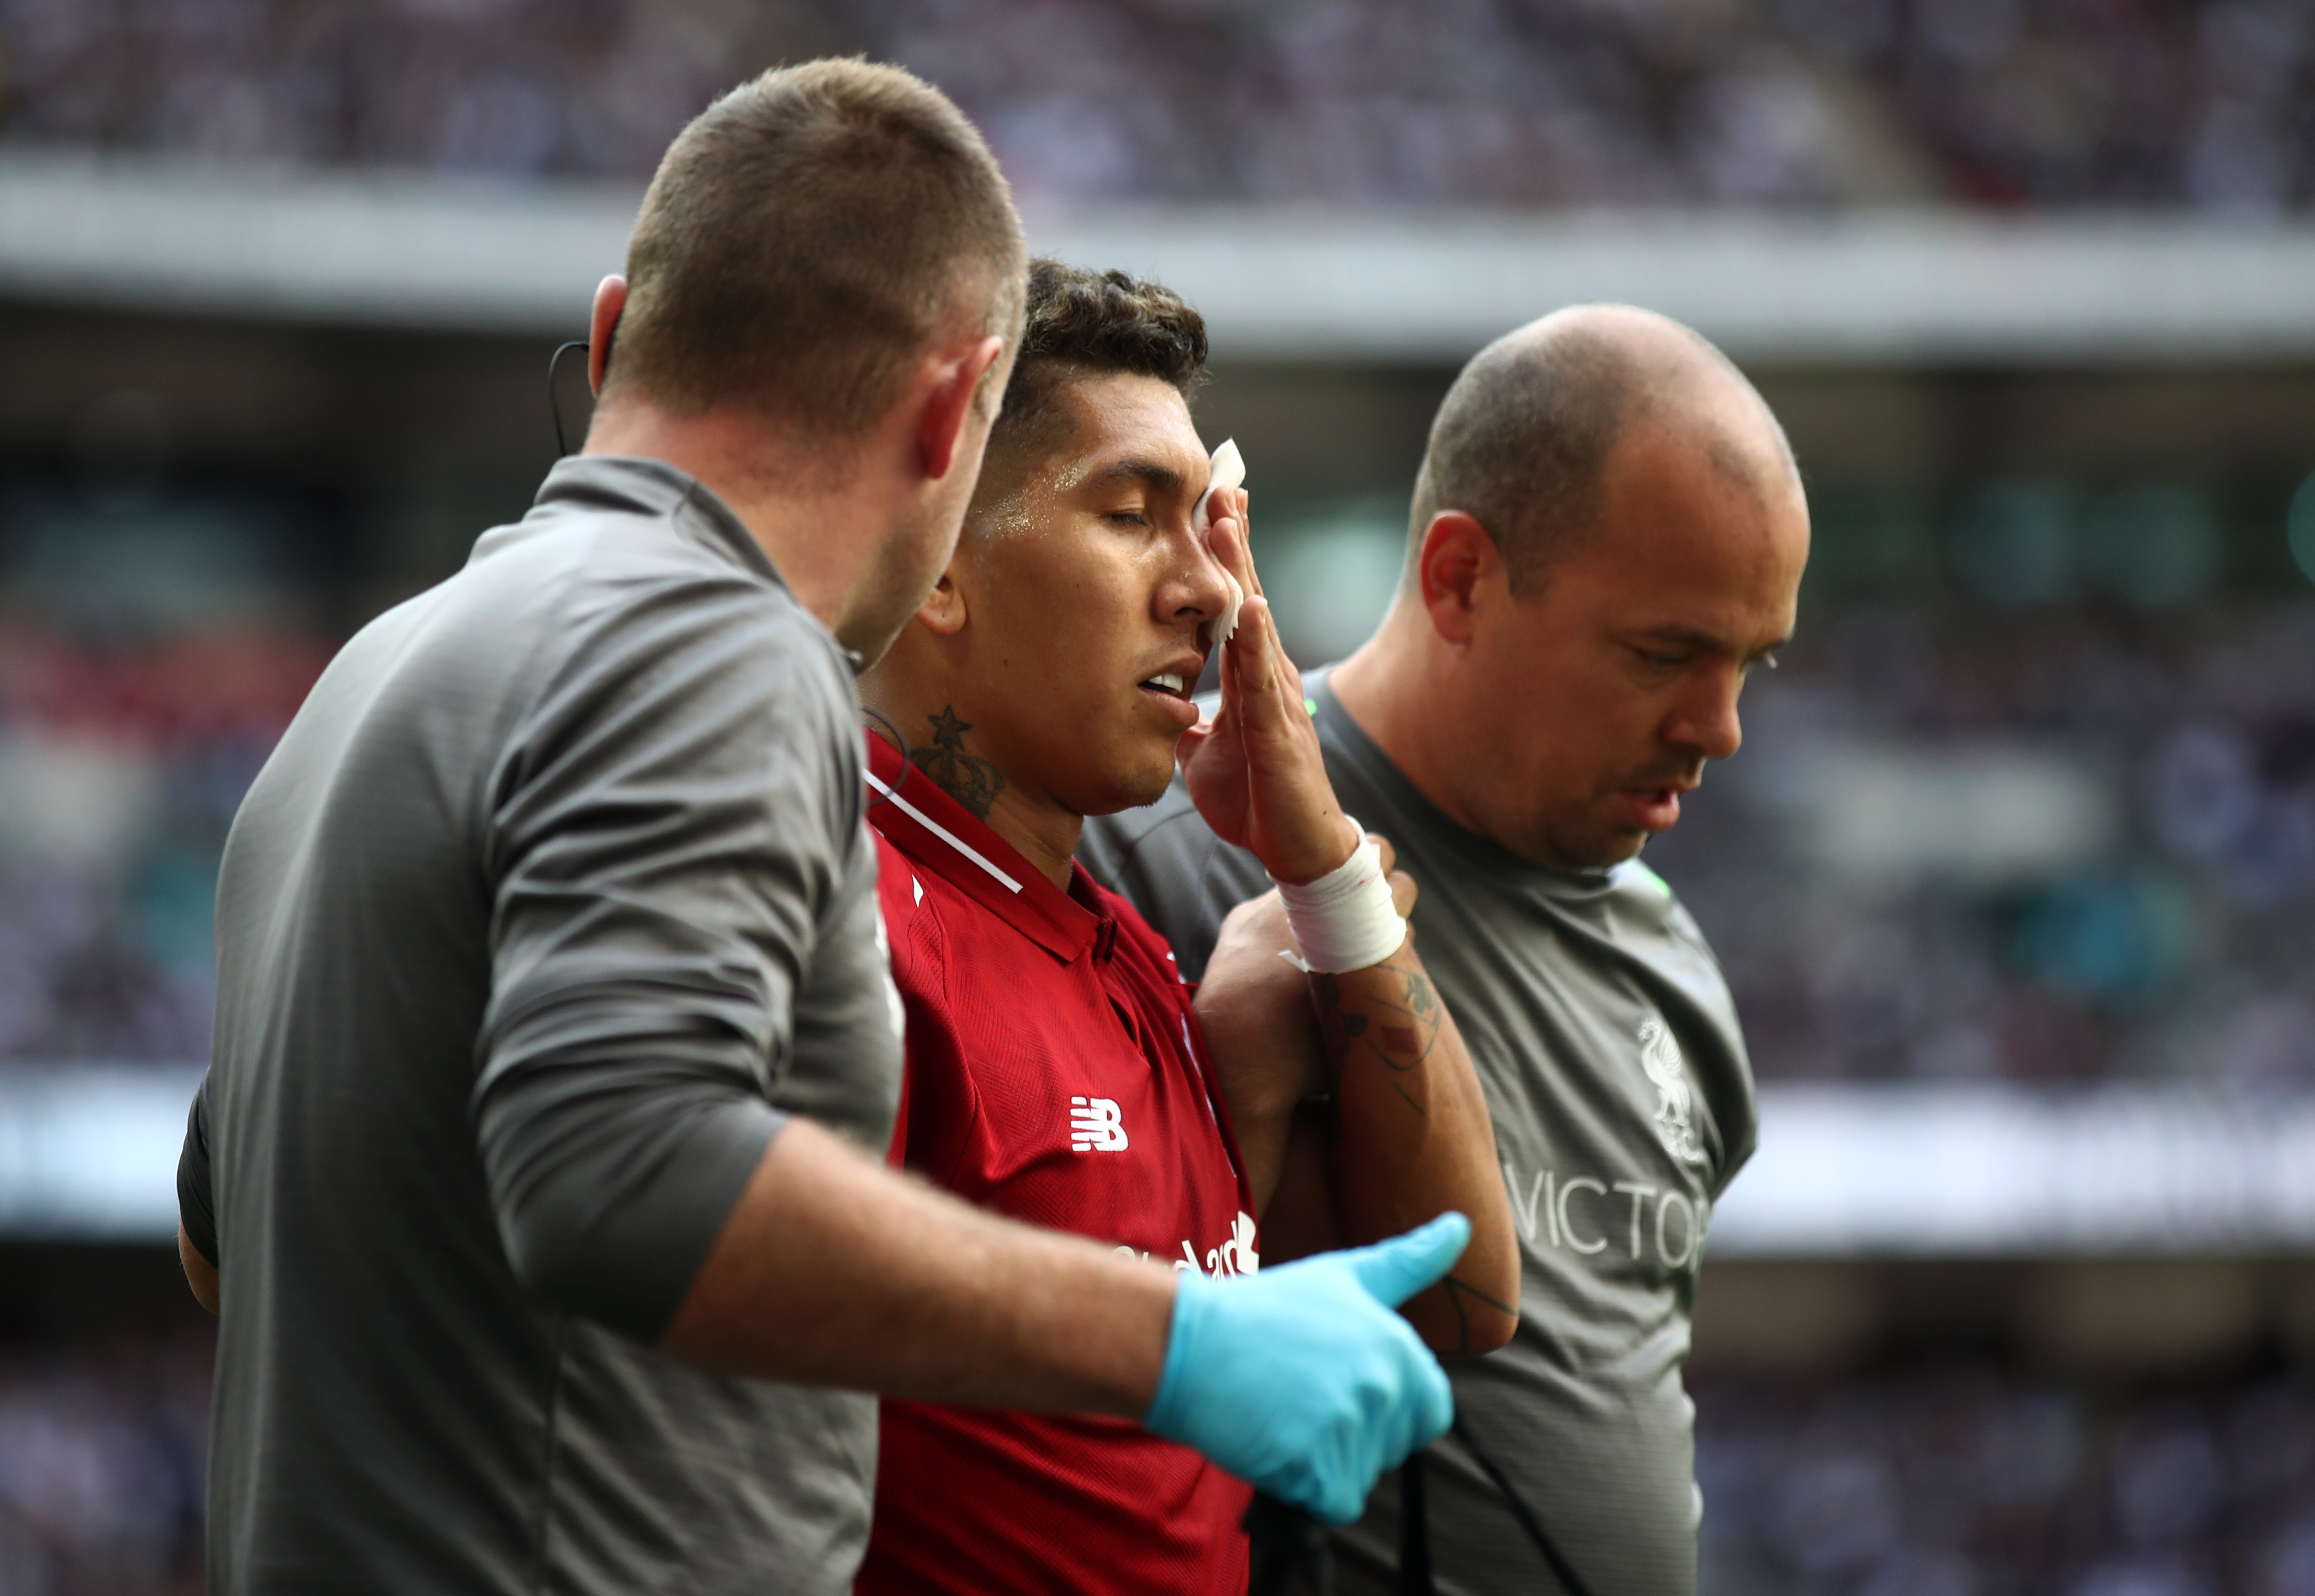 LONDON, ENGLAND - SEPTEMBER 15:  Roberto Firmino of Liverpool leaves the pitch injured during the Premier League match between Tottenham Hotspur and Liverpool FC at Wembley Stadium on September 15, 2018 in London, United Kingdom.  (Photo by Julian Finney/Getty Images)